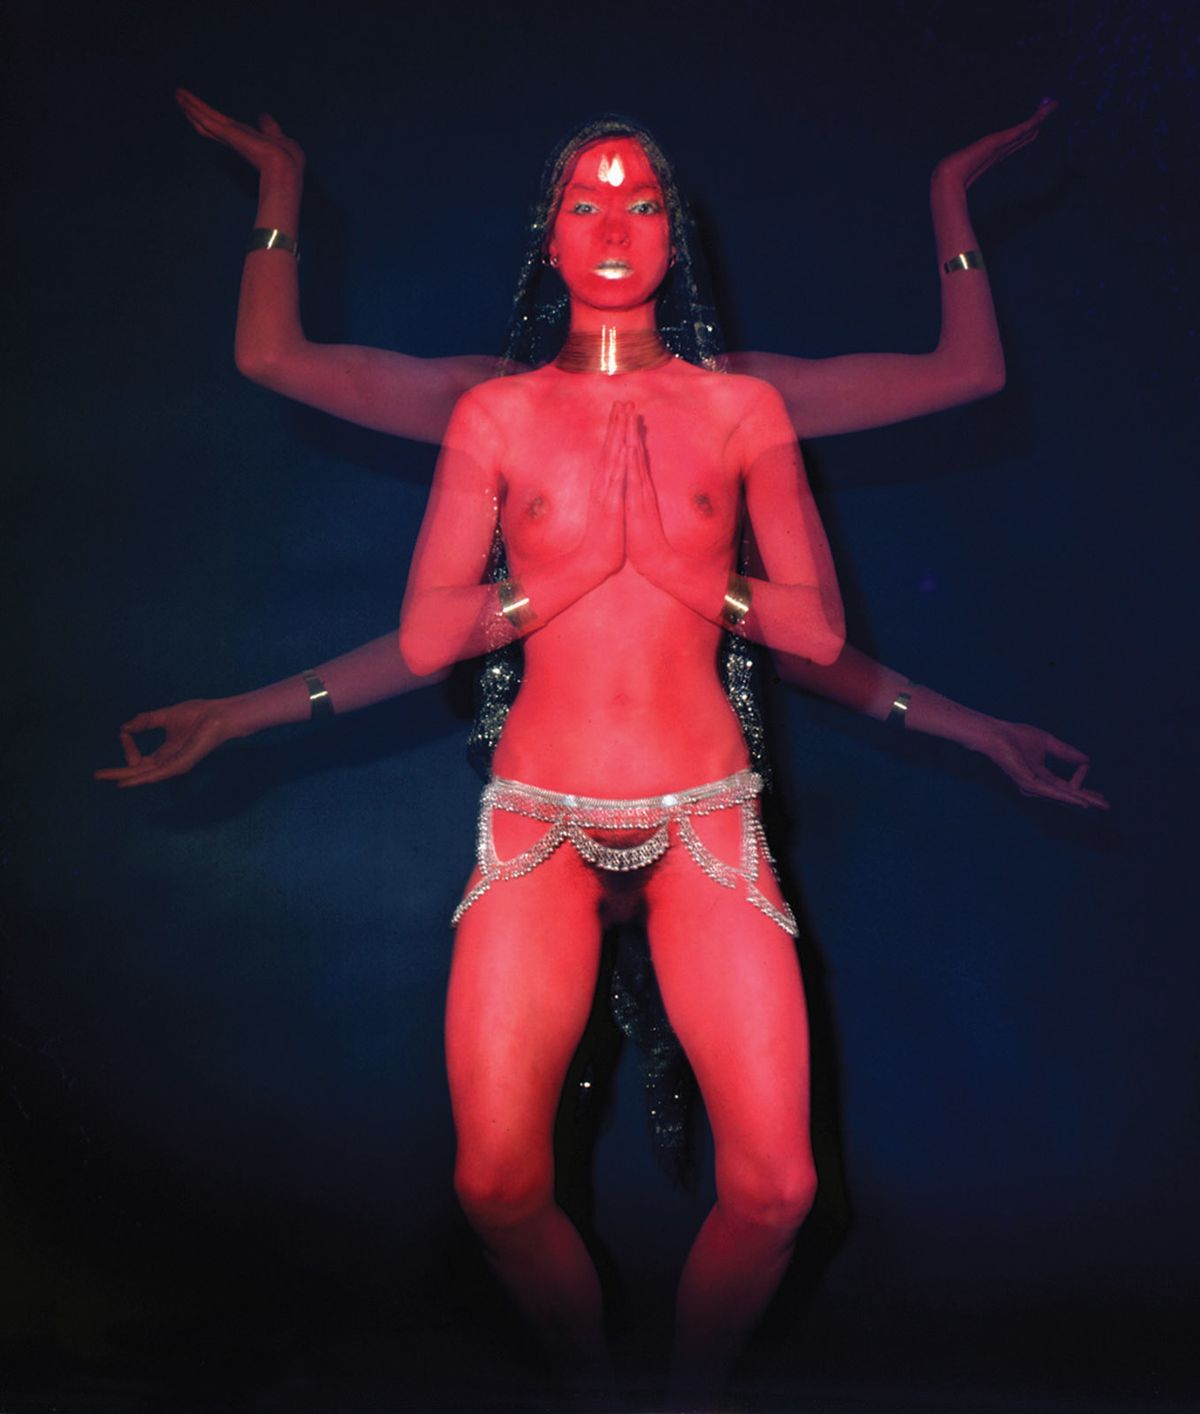 Penny Slinger, pictured as Red Dakini (1977), will feature at Richard Saltoun Gallery, which is embarking on a year of women-only shows. Photo: Mayotte Magnus © The Artist; Courtesy Richard Saltoun Gallery, London.